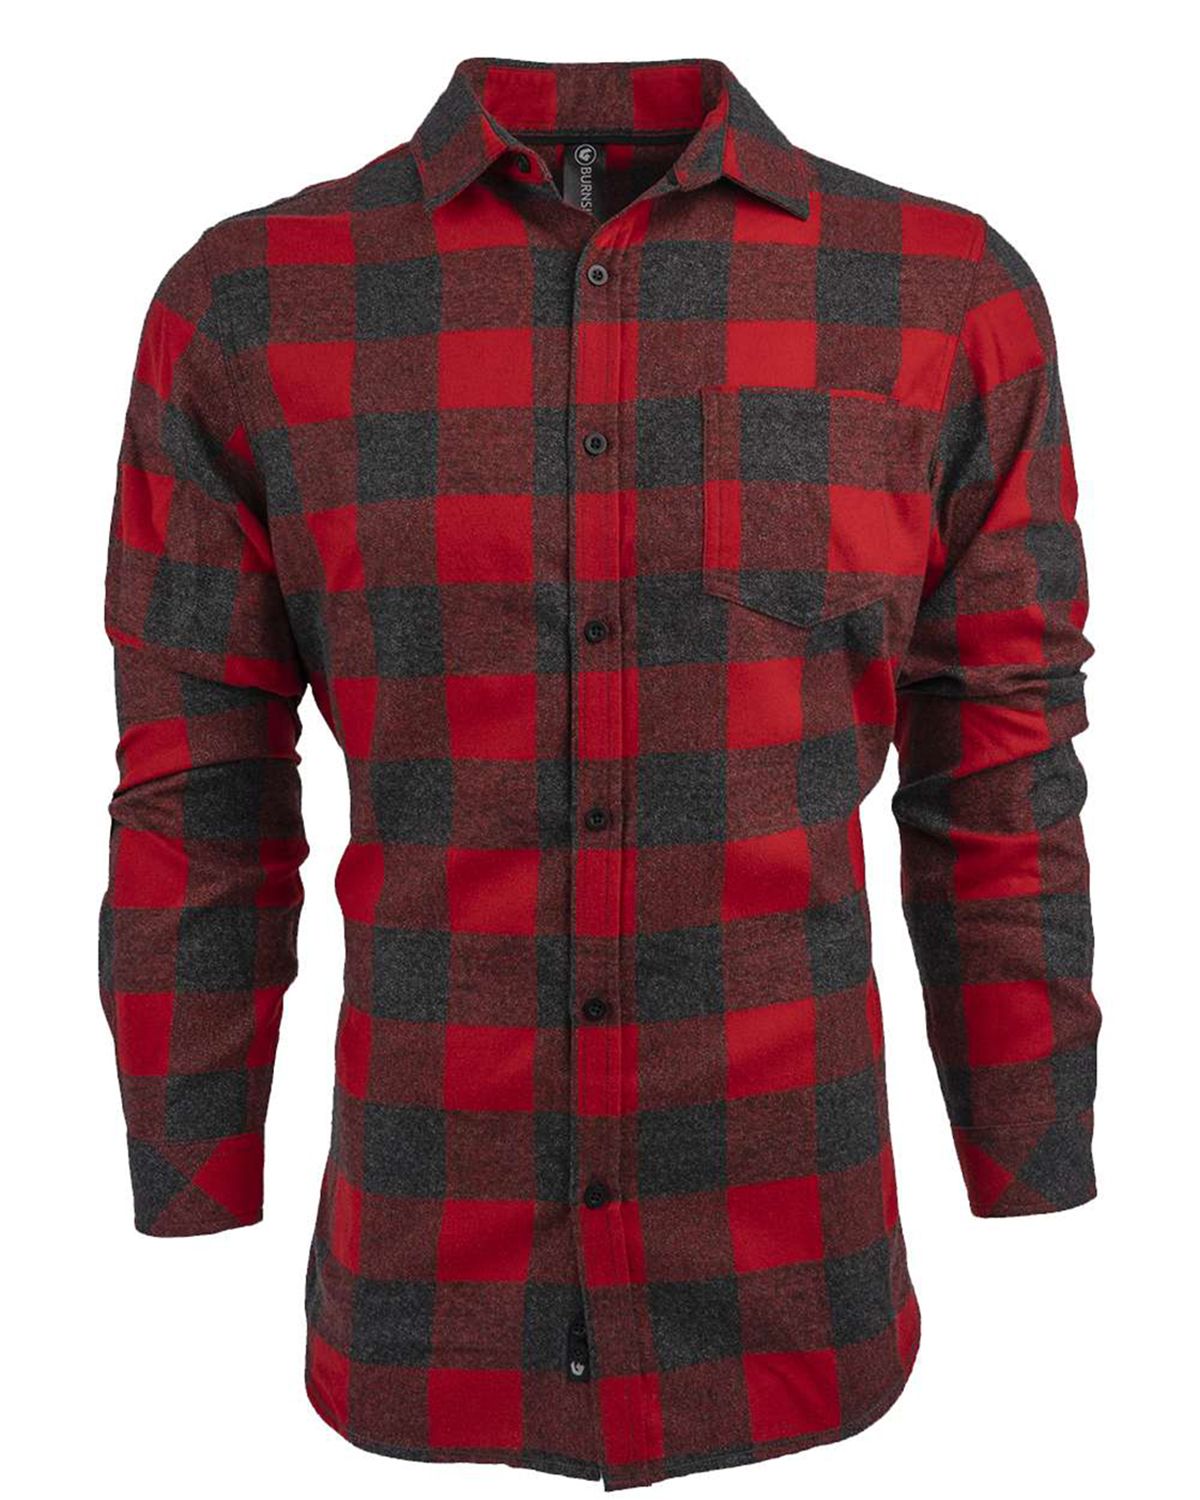 Mens Check Shirt Brave Soul Albert Flannel Brushed Cotton Long Sleeve Casual Top